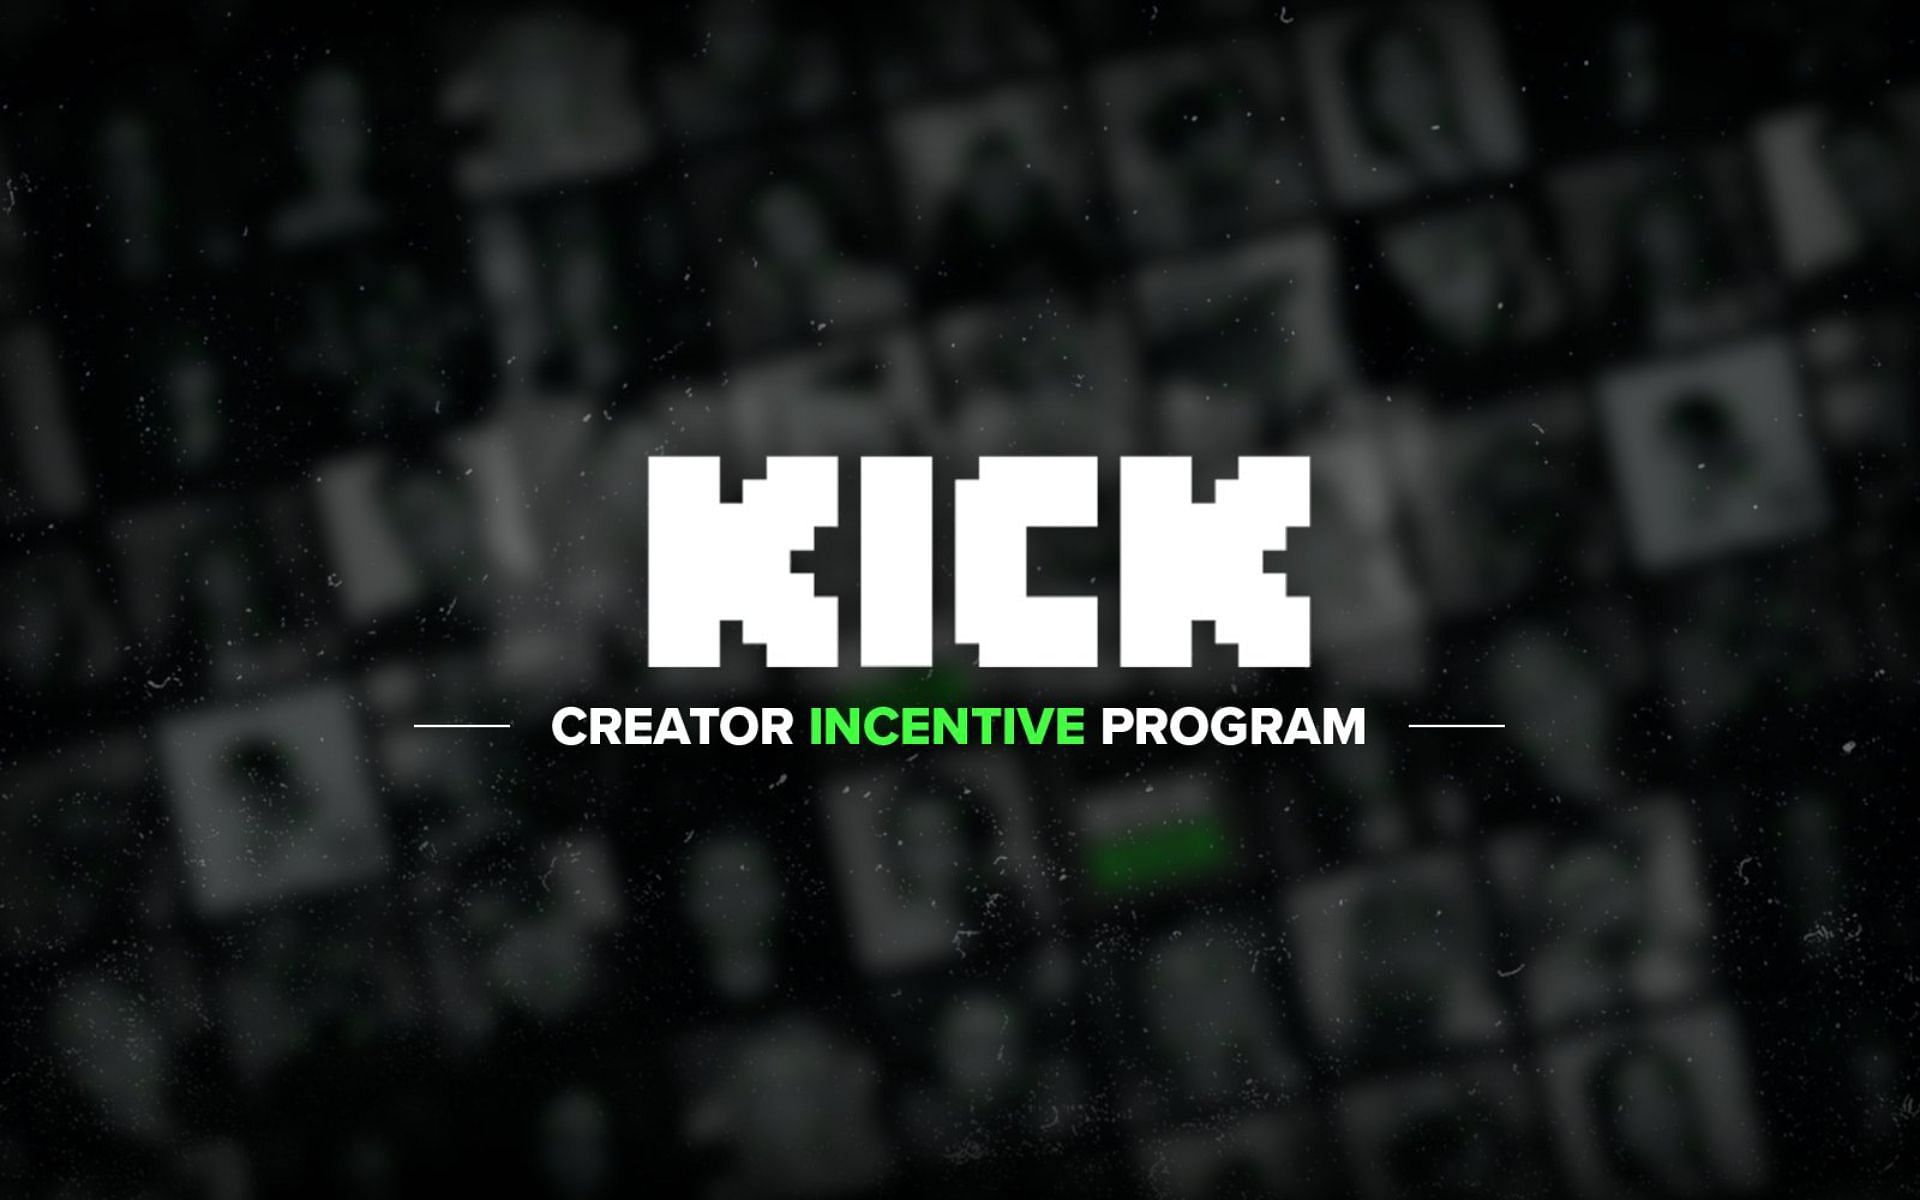 What are the minimum requirements for the Kick Creator Incentive Program? (Image via @StakeEddie/X)